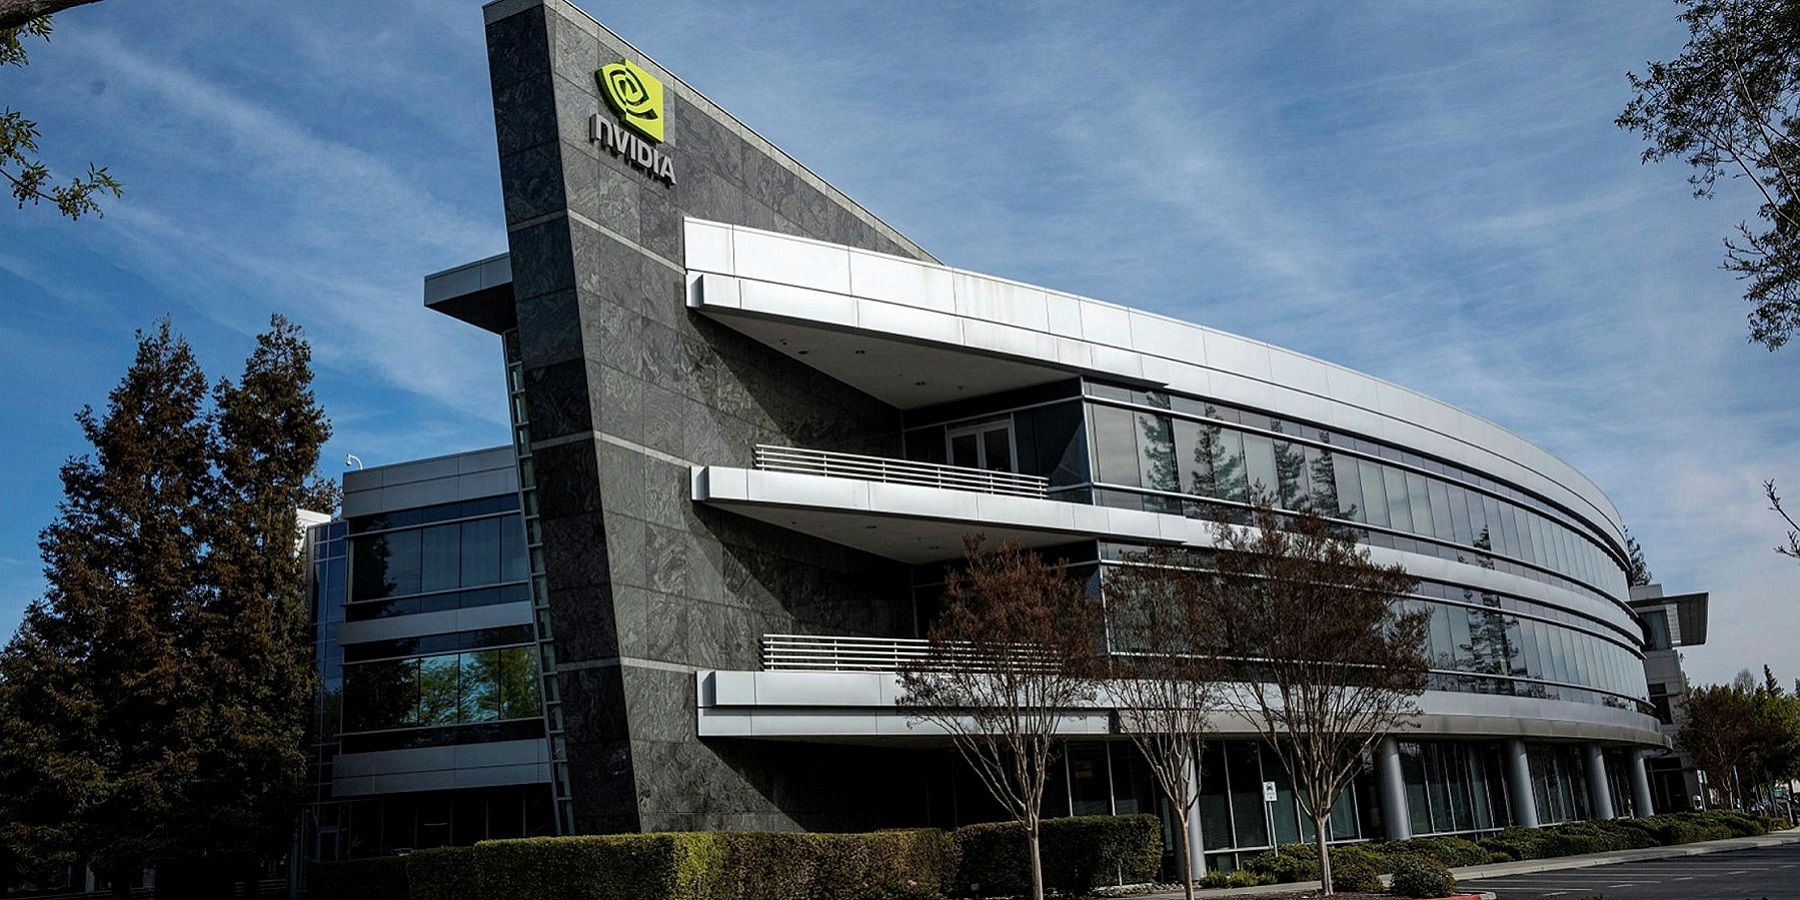 Photo showing the outside of the Nvidia Campus building in Sanat Clara, CA, USA.